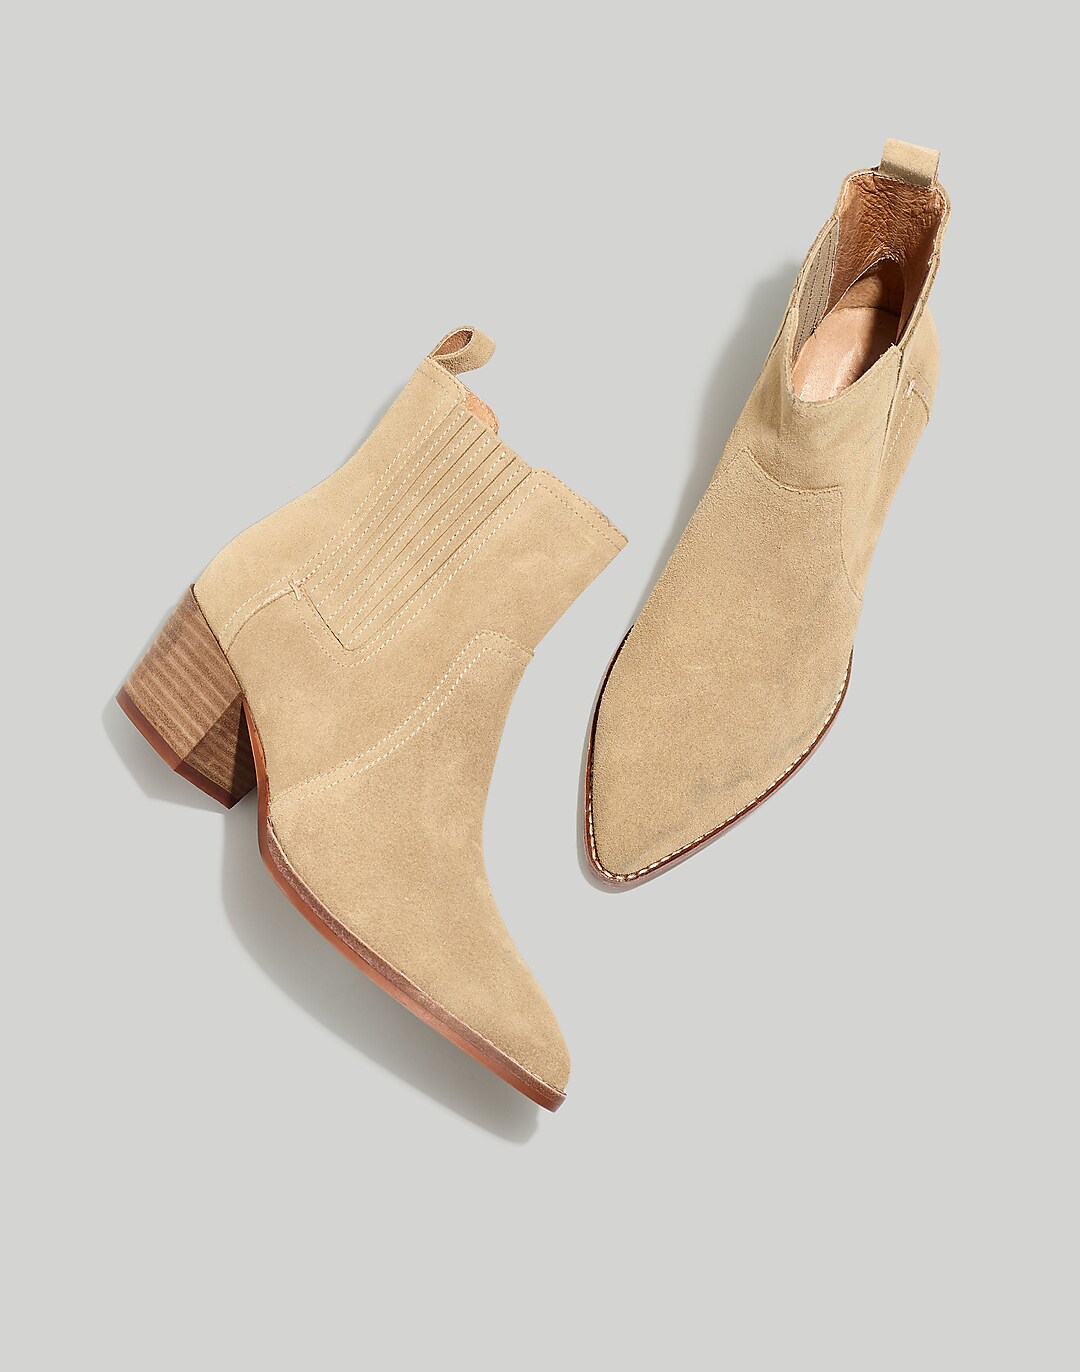 The Western Ankle Boot in Suede